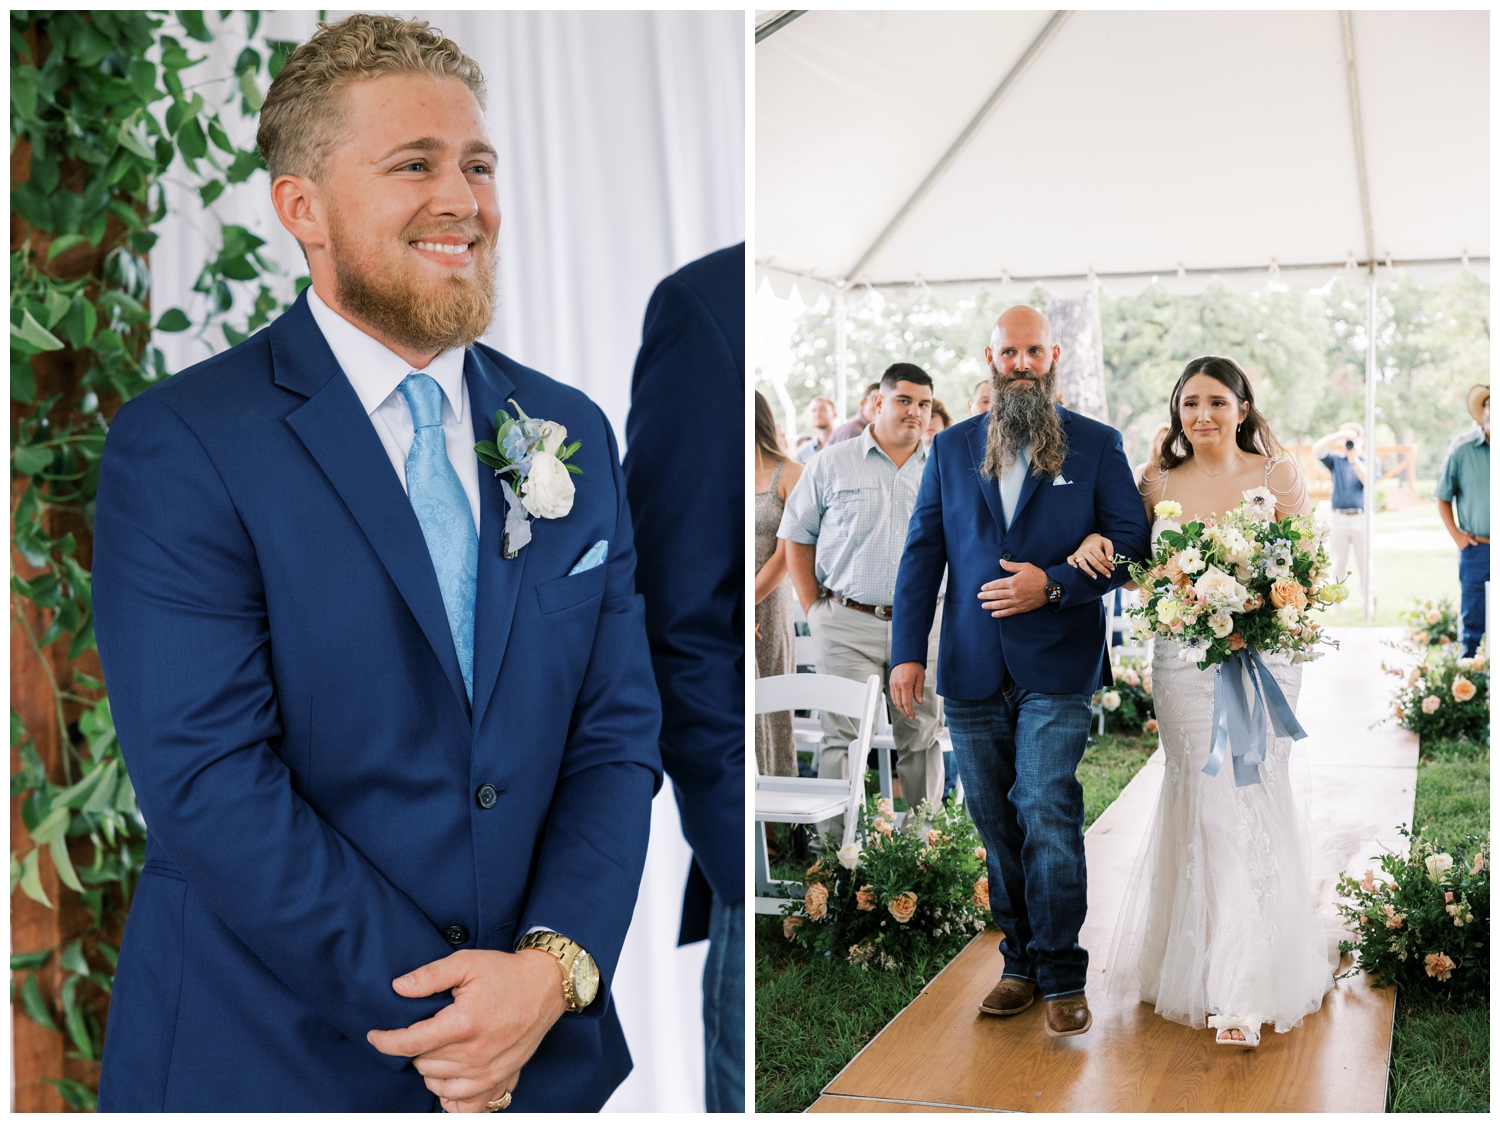 bride and father walking down aisle groom smiling outdoor tent wedding ceremony